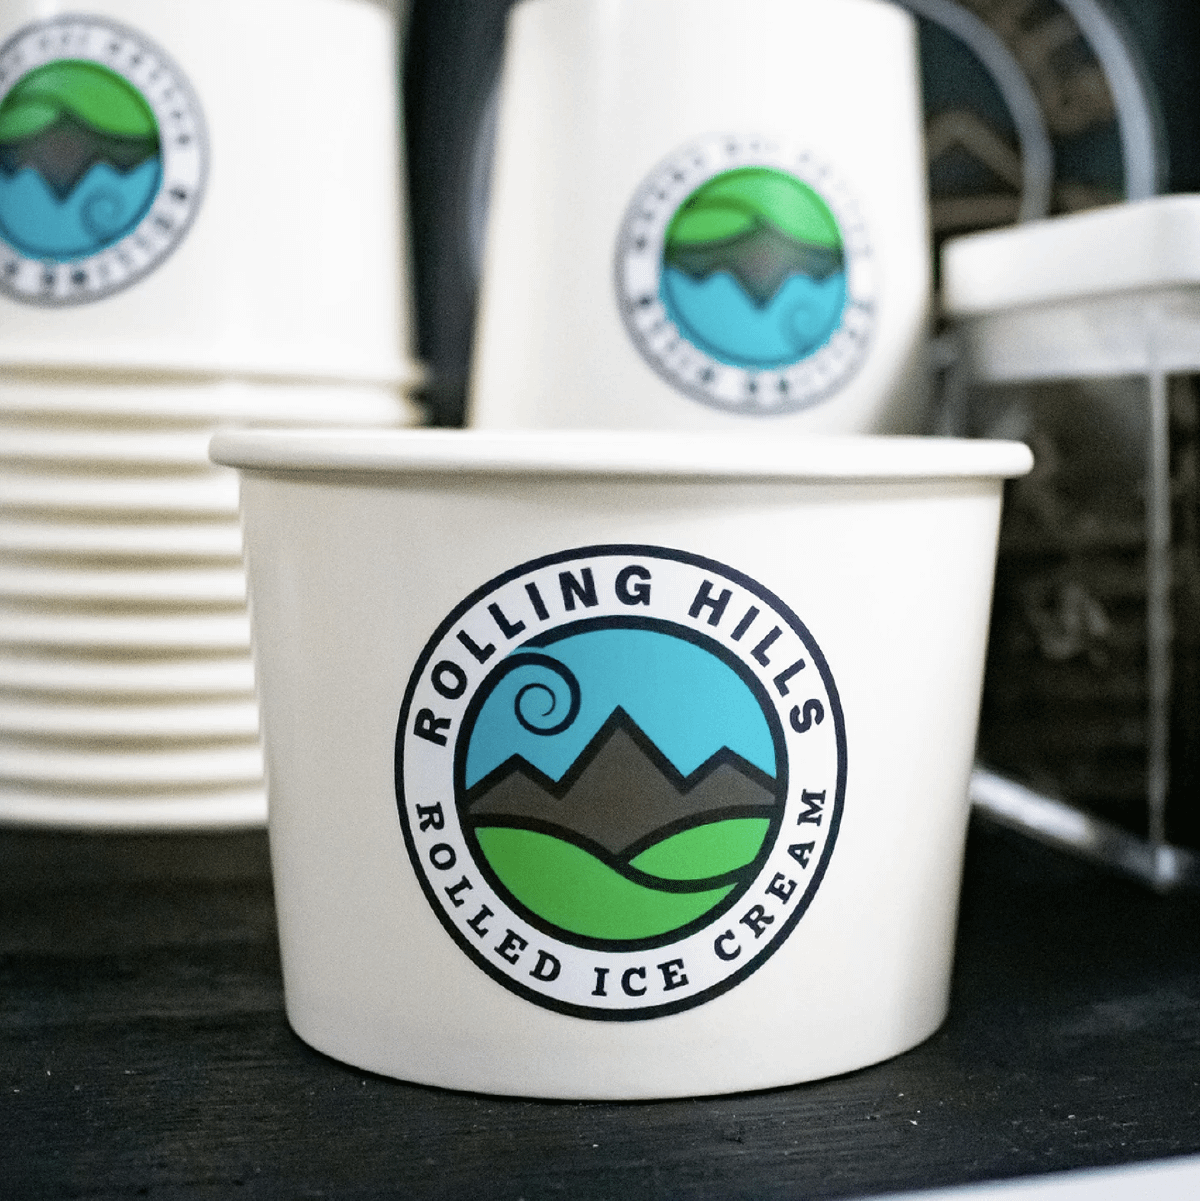 Rolling Hills Rolled Ice Cream logo on ice cream cups